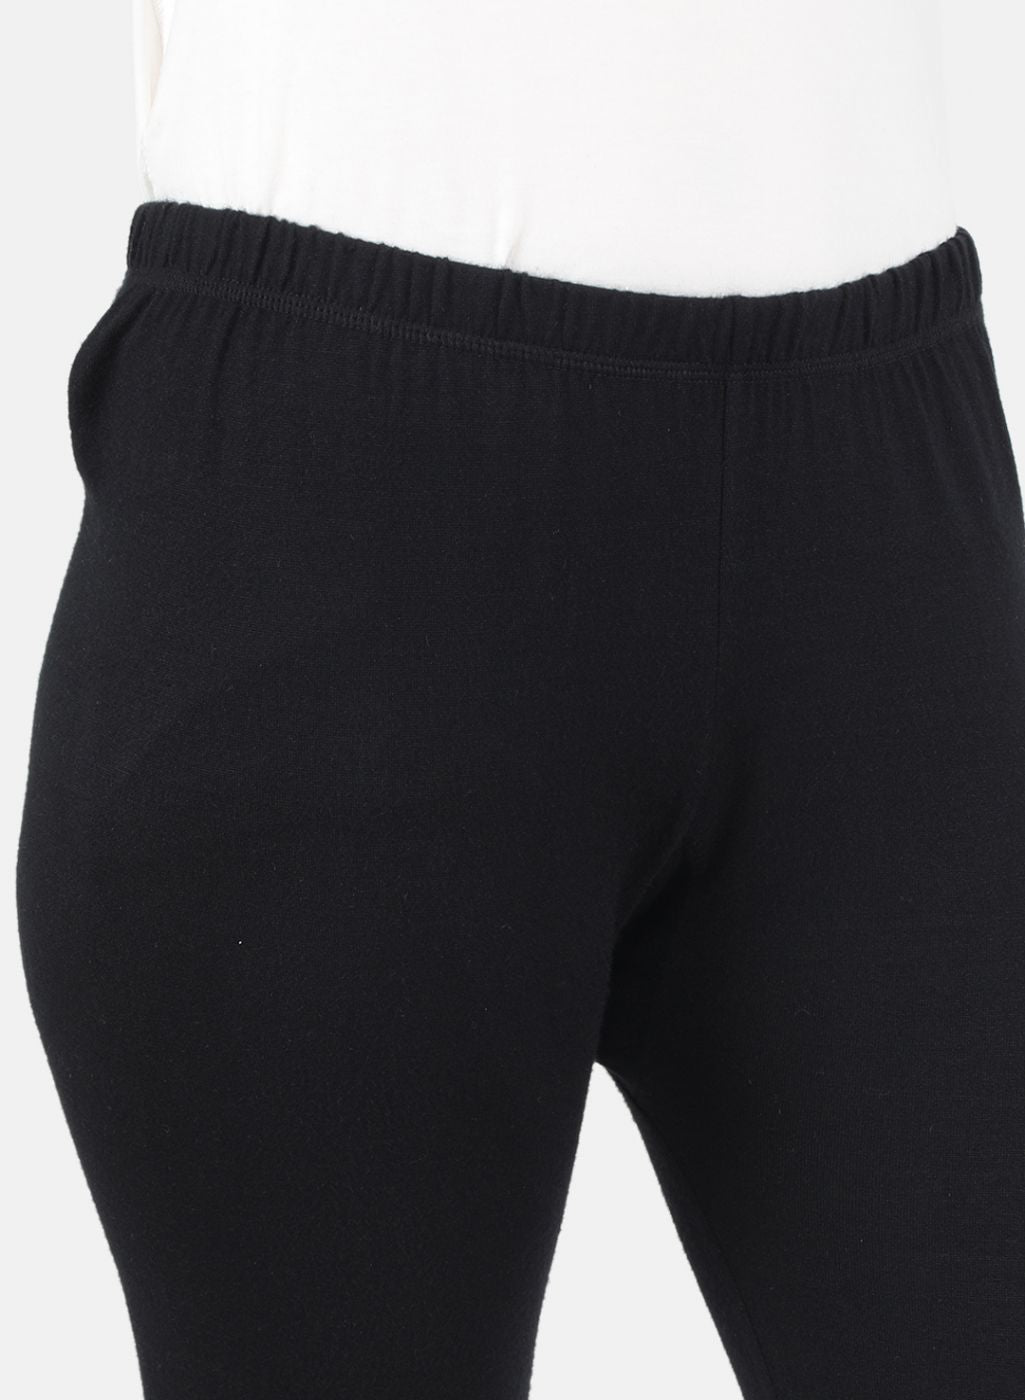 Women Black Solid Thermal Lower